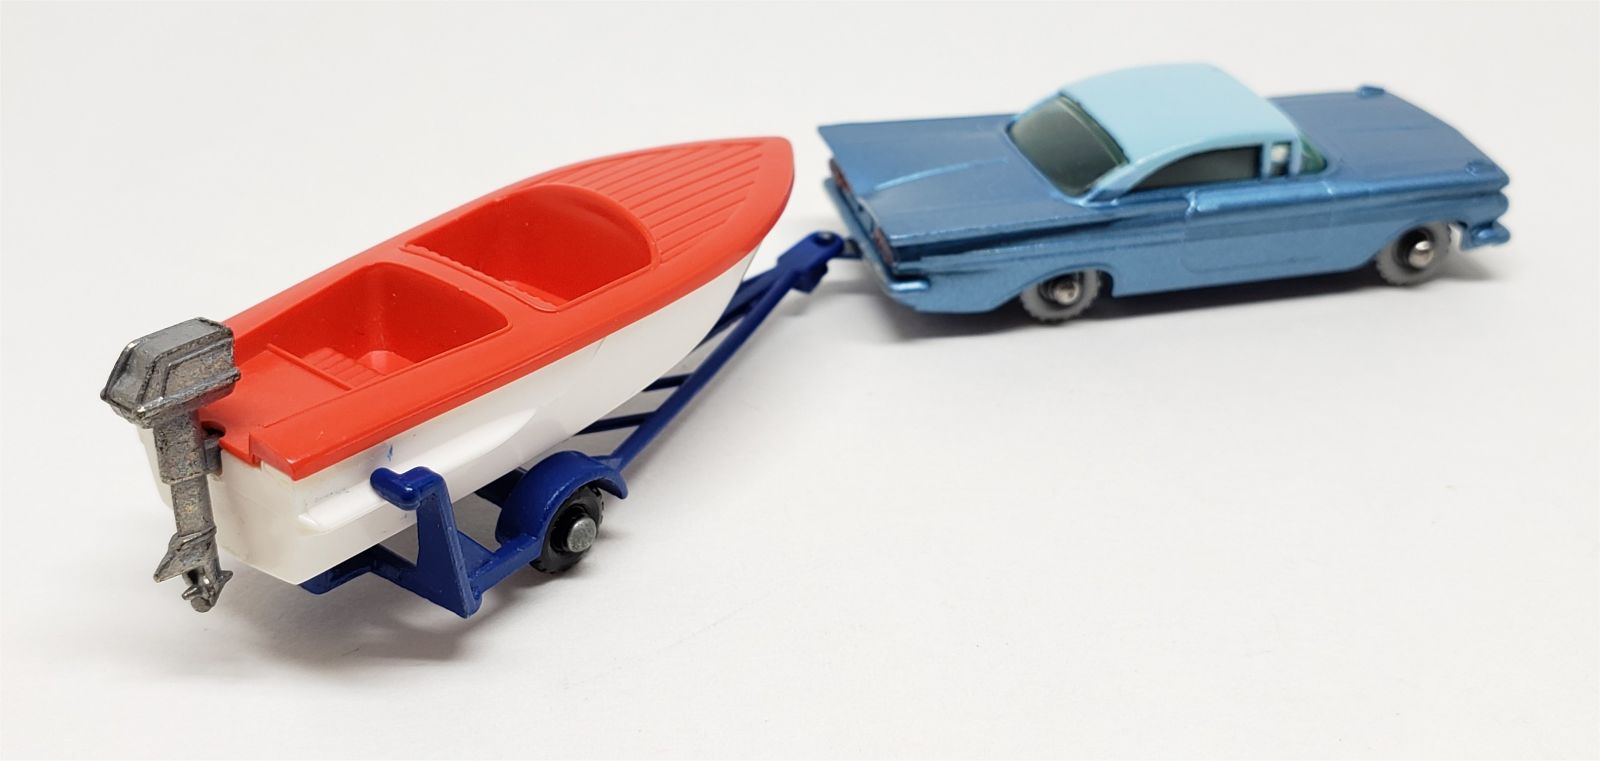 Illustration for article titled [REVIEW] Lesney Matchbox Sports Boat and Trailer